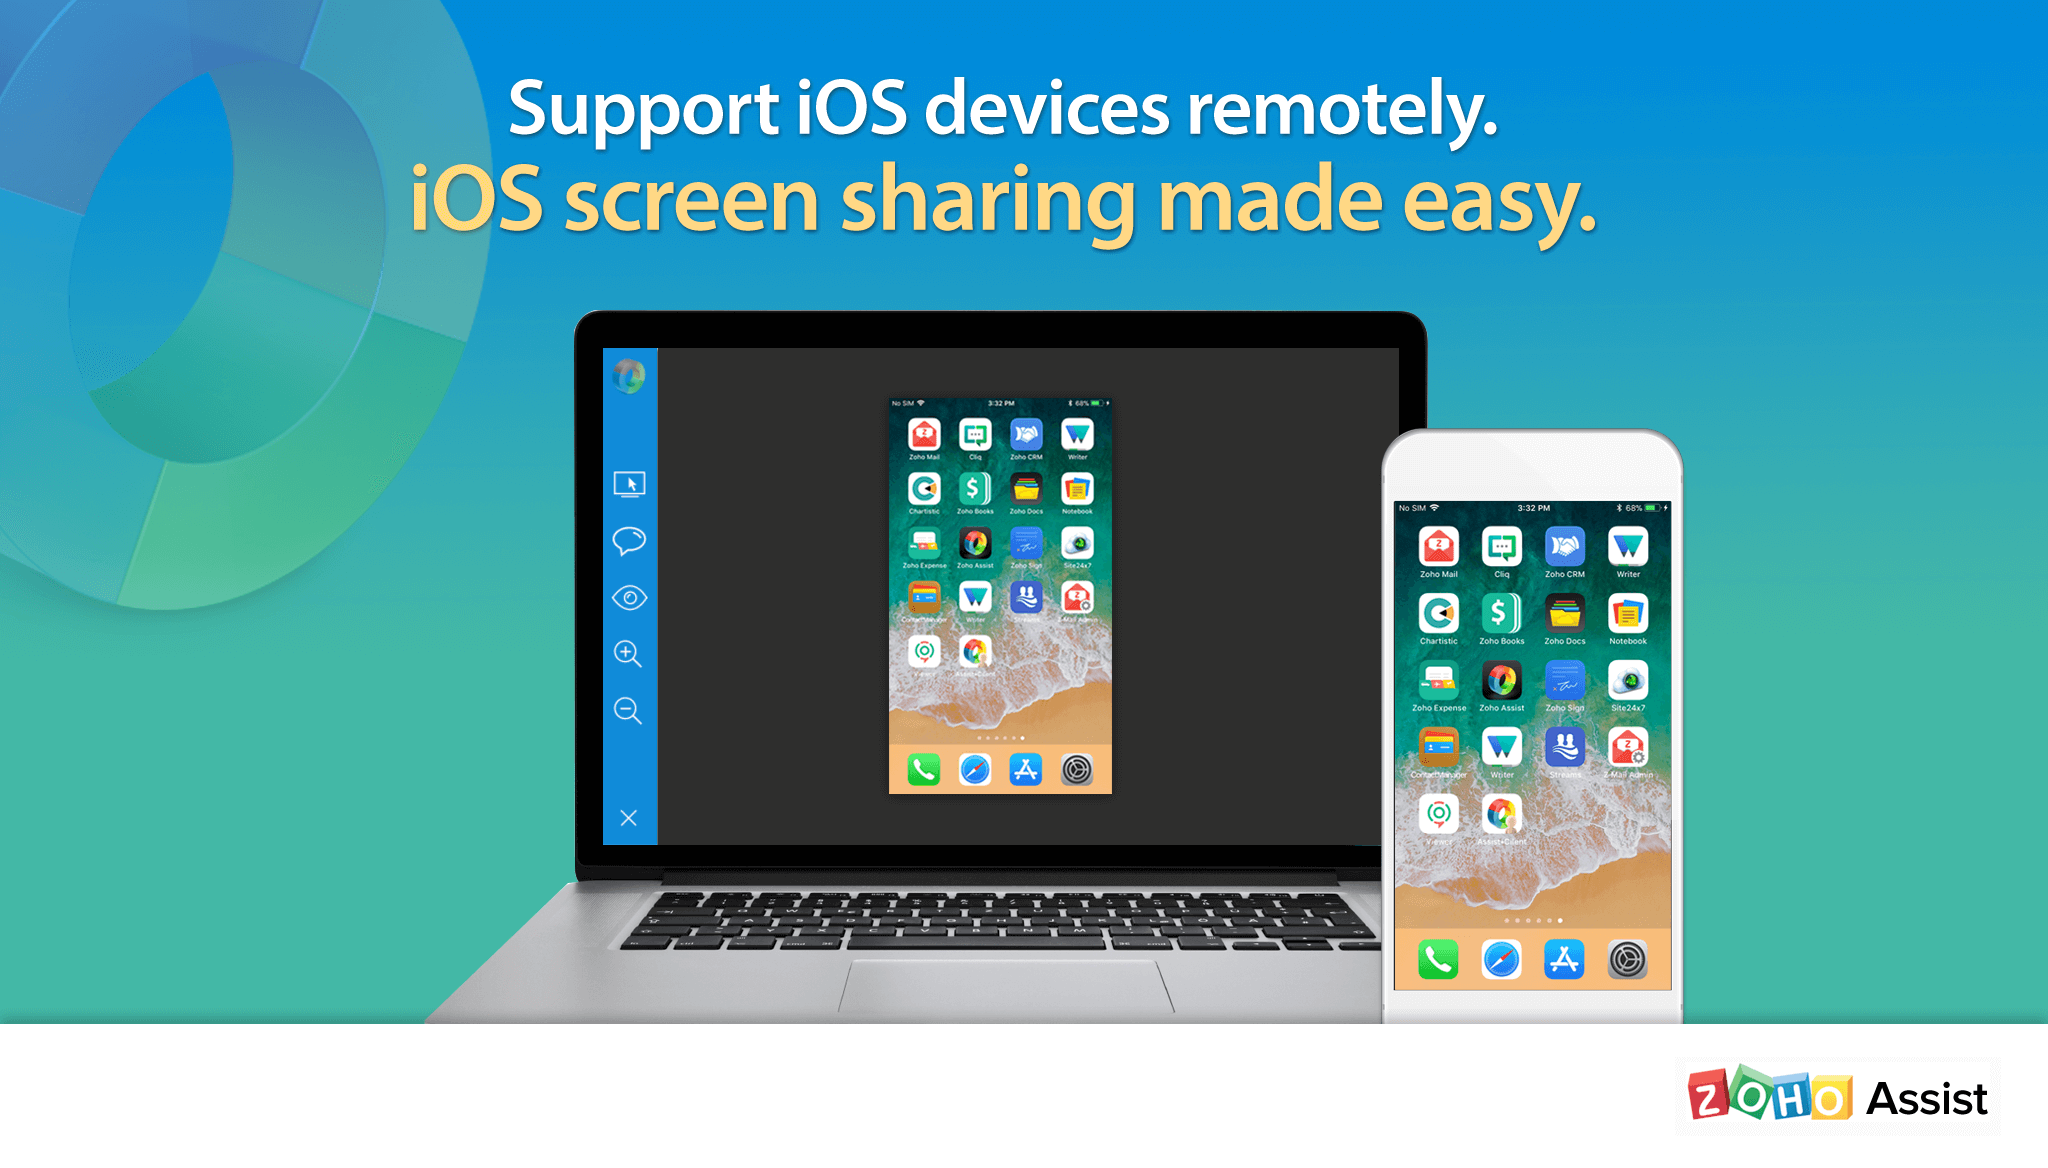 Zoho Assist: Remote Support for iOS Devices Made Easy